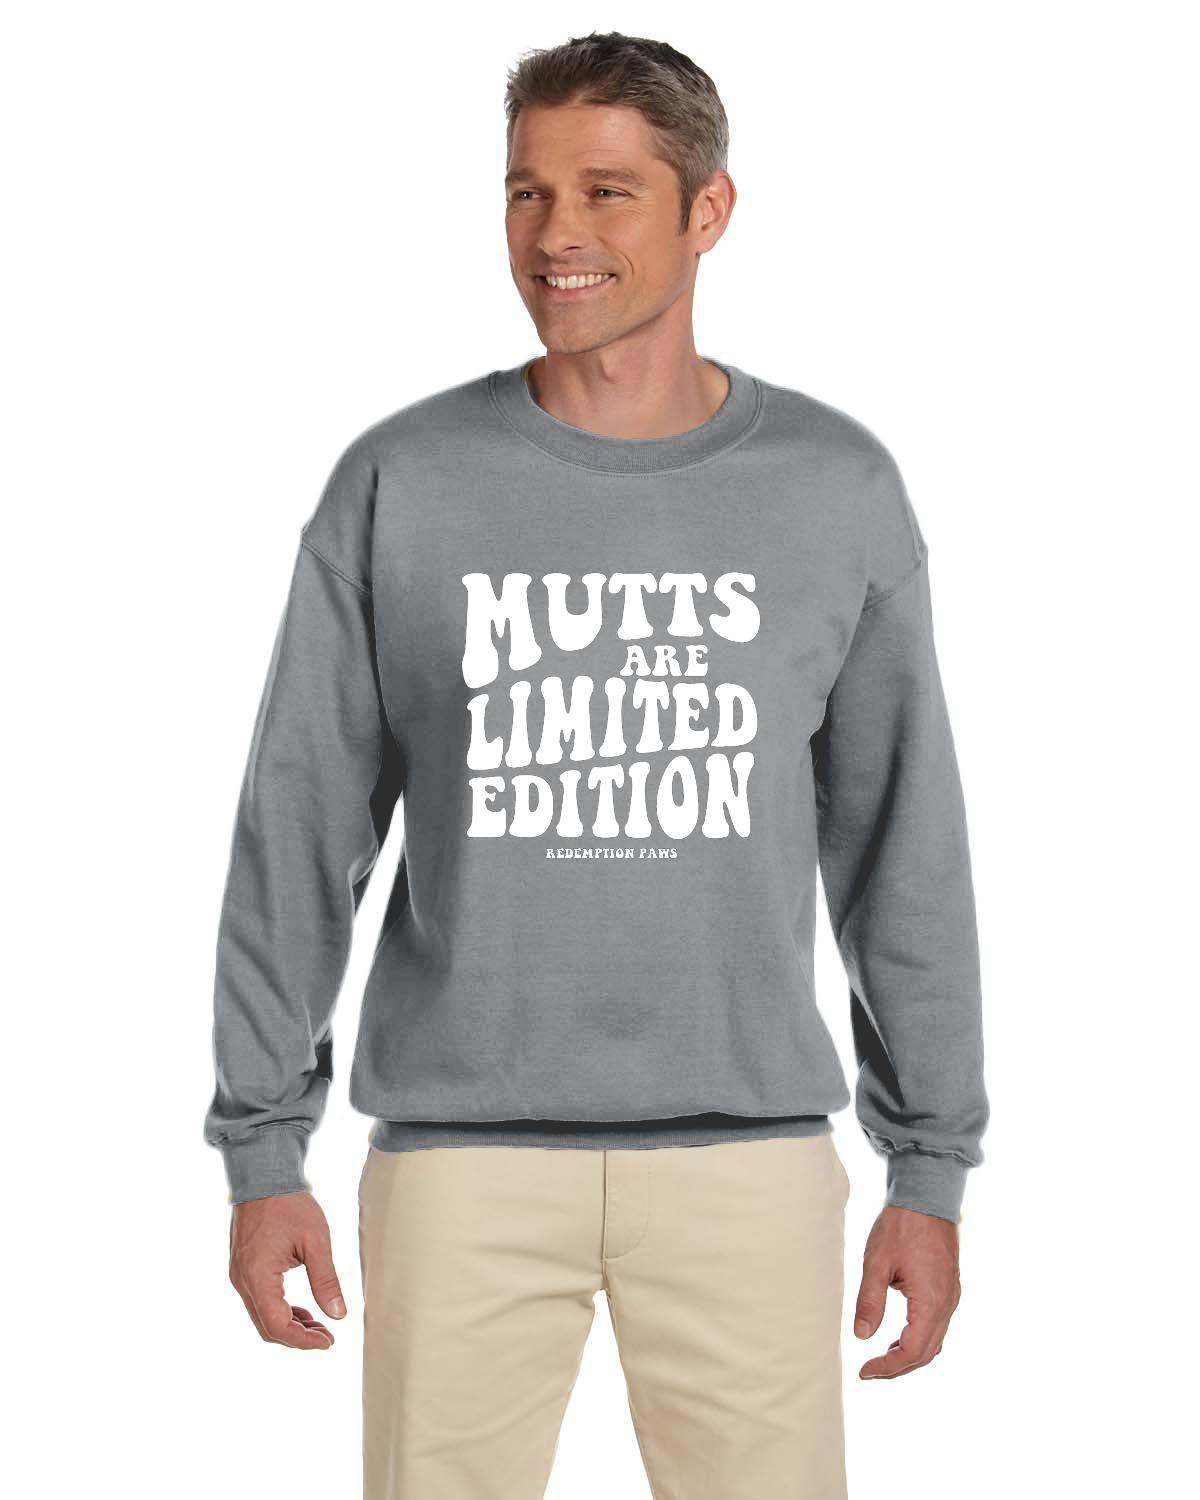 Mutts are Limited Edition Sweatshirt